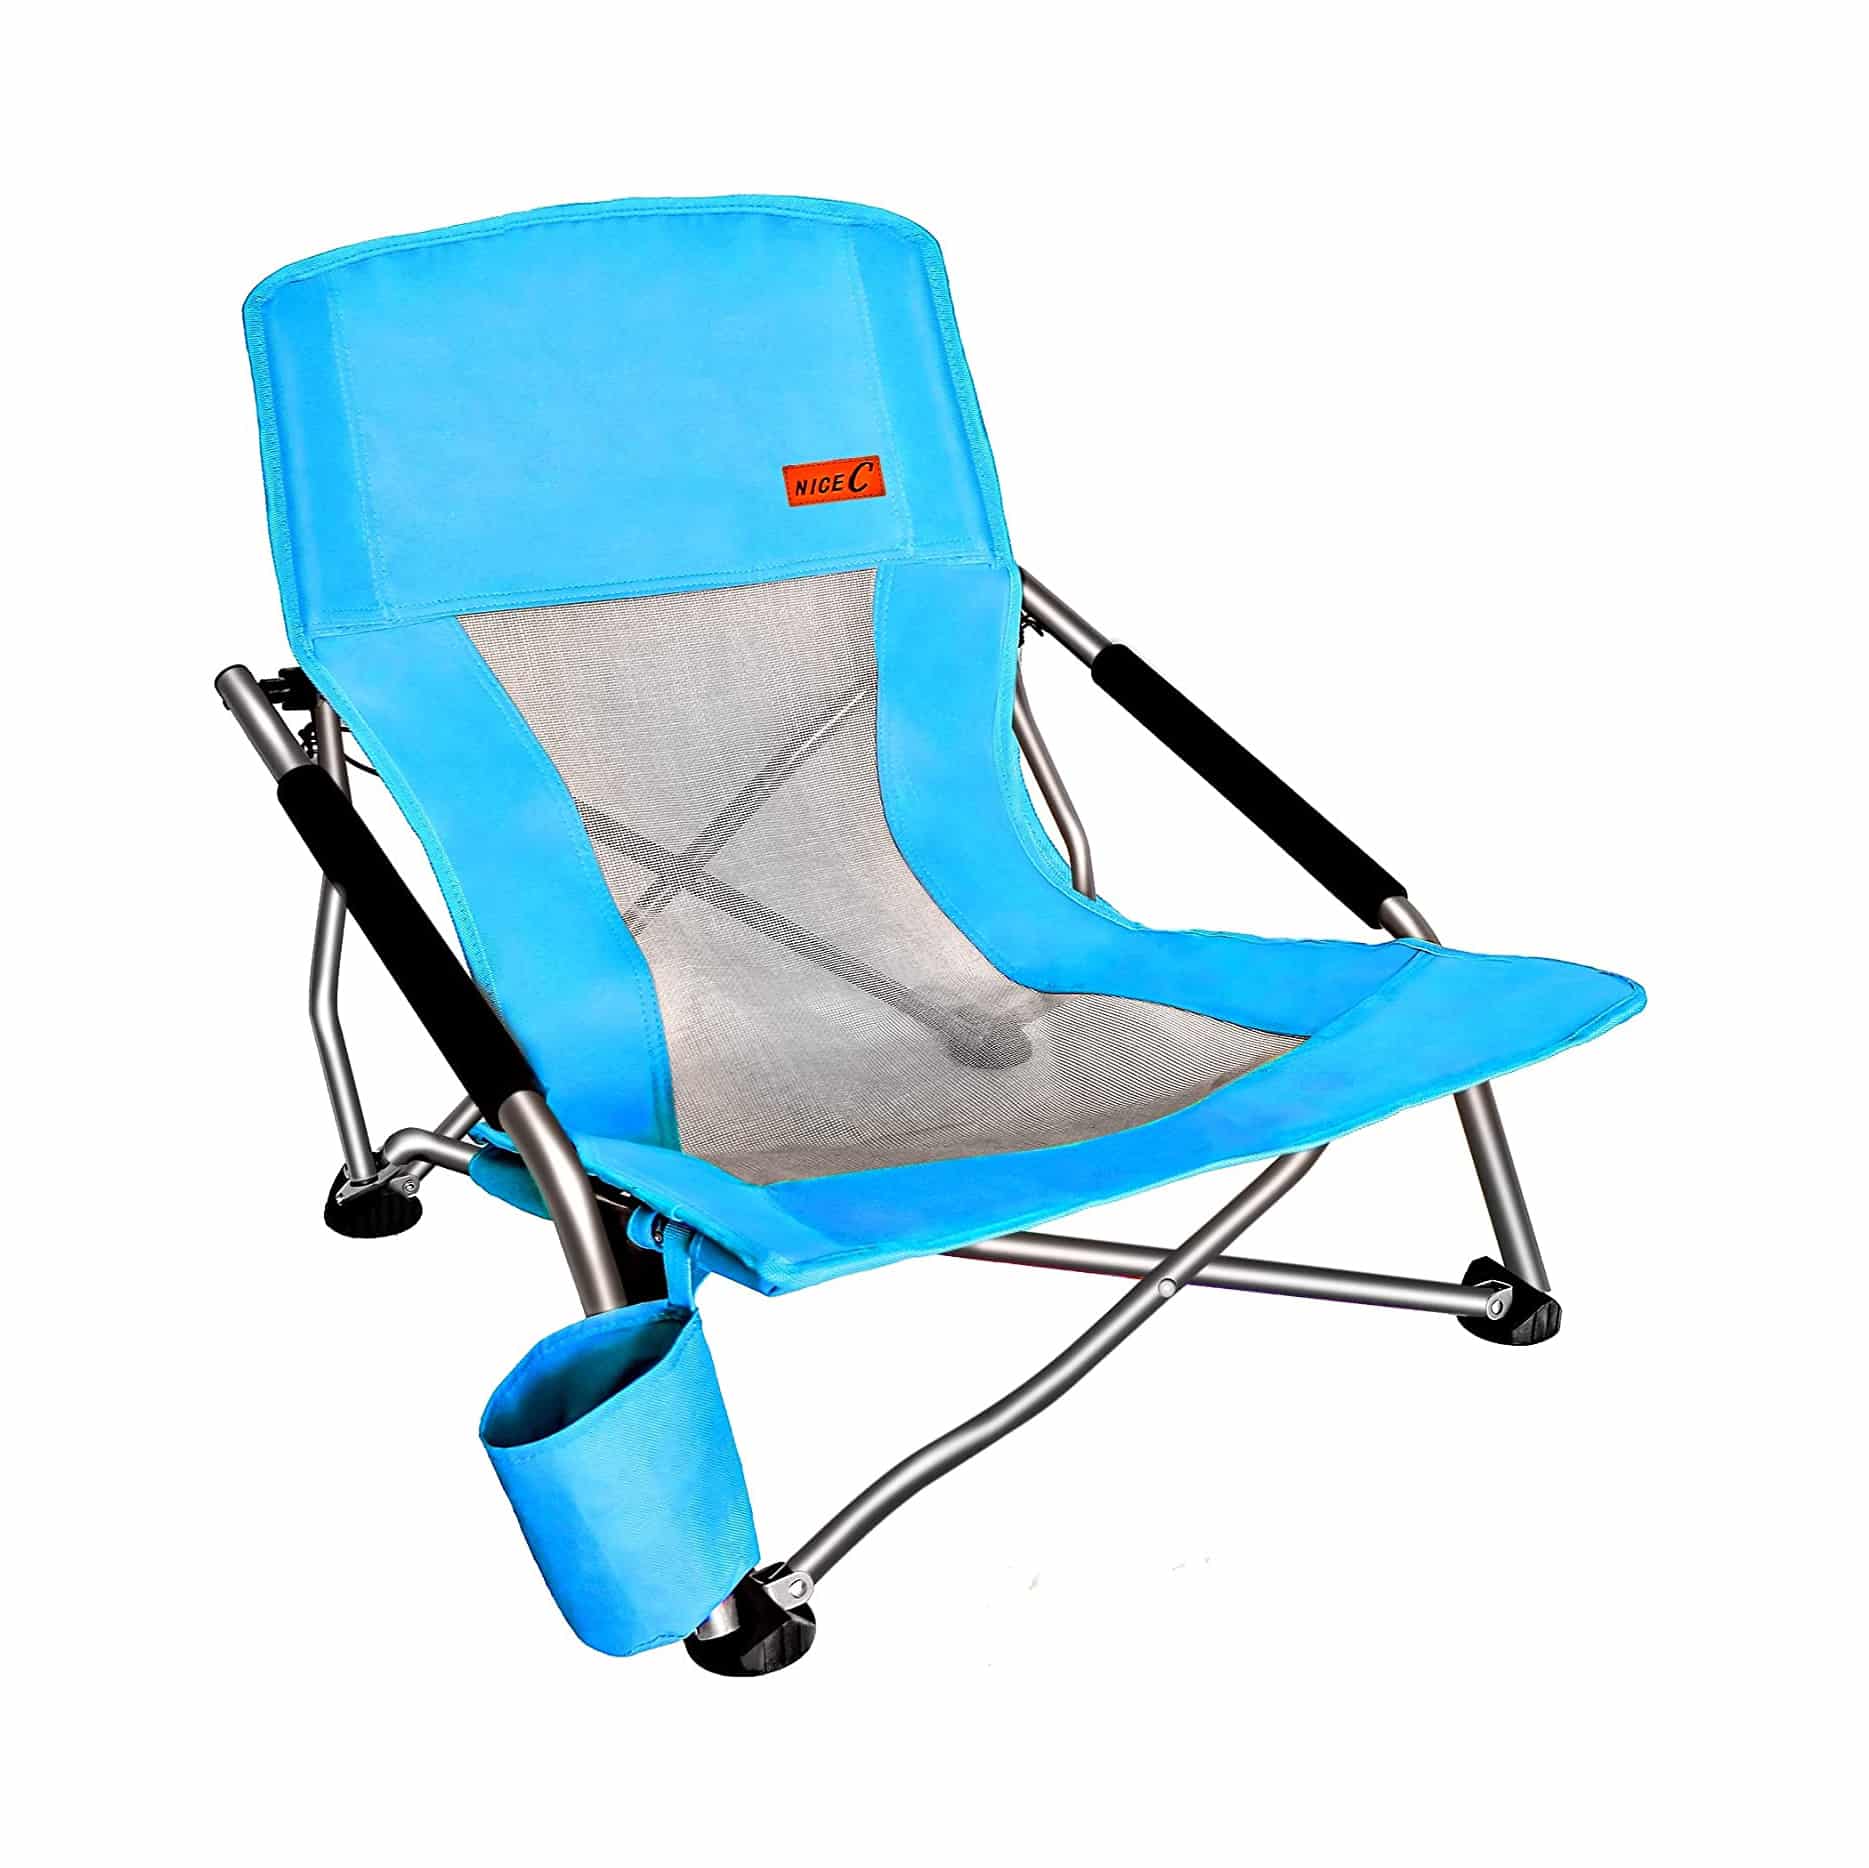 Top 10 Best Backpack Beach Chairs in 2020 Reviews Buyer's Guide